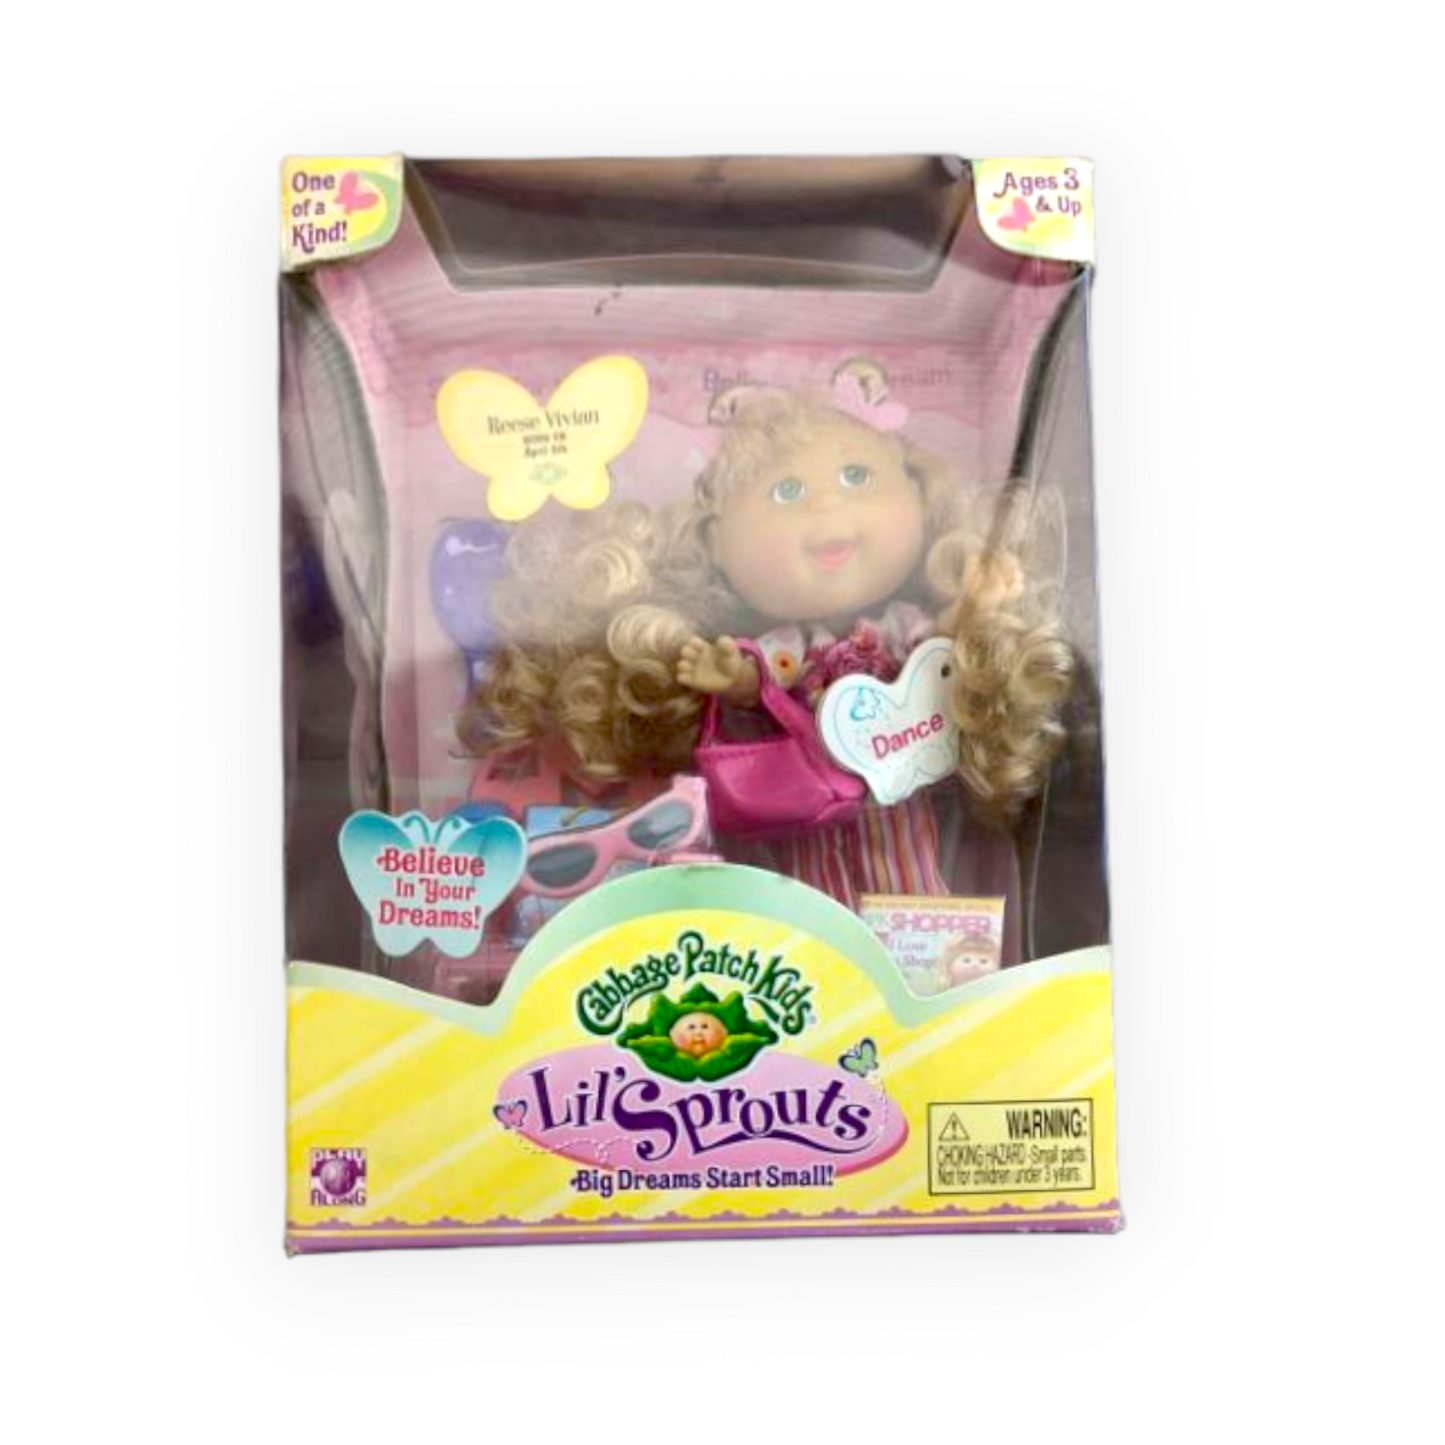 Lil's Sprouts Cabbage Patch Kids Reese Vivian Doll Set -'Believe in Your Dreams'